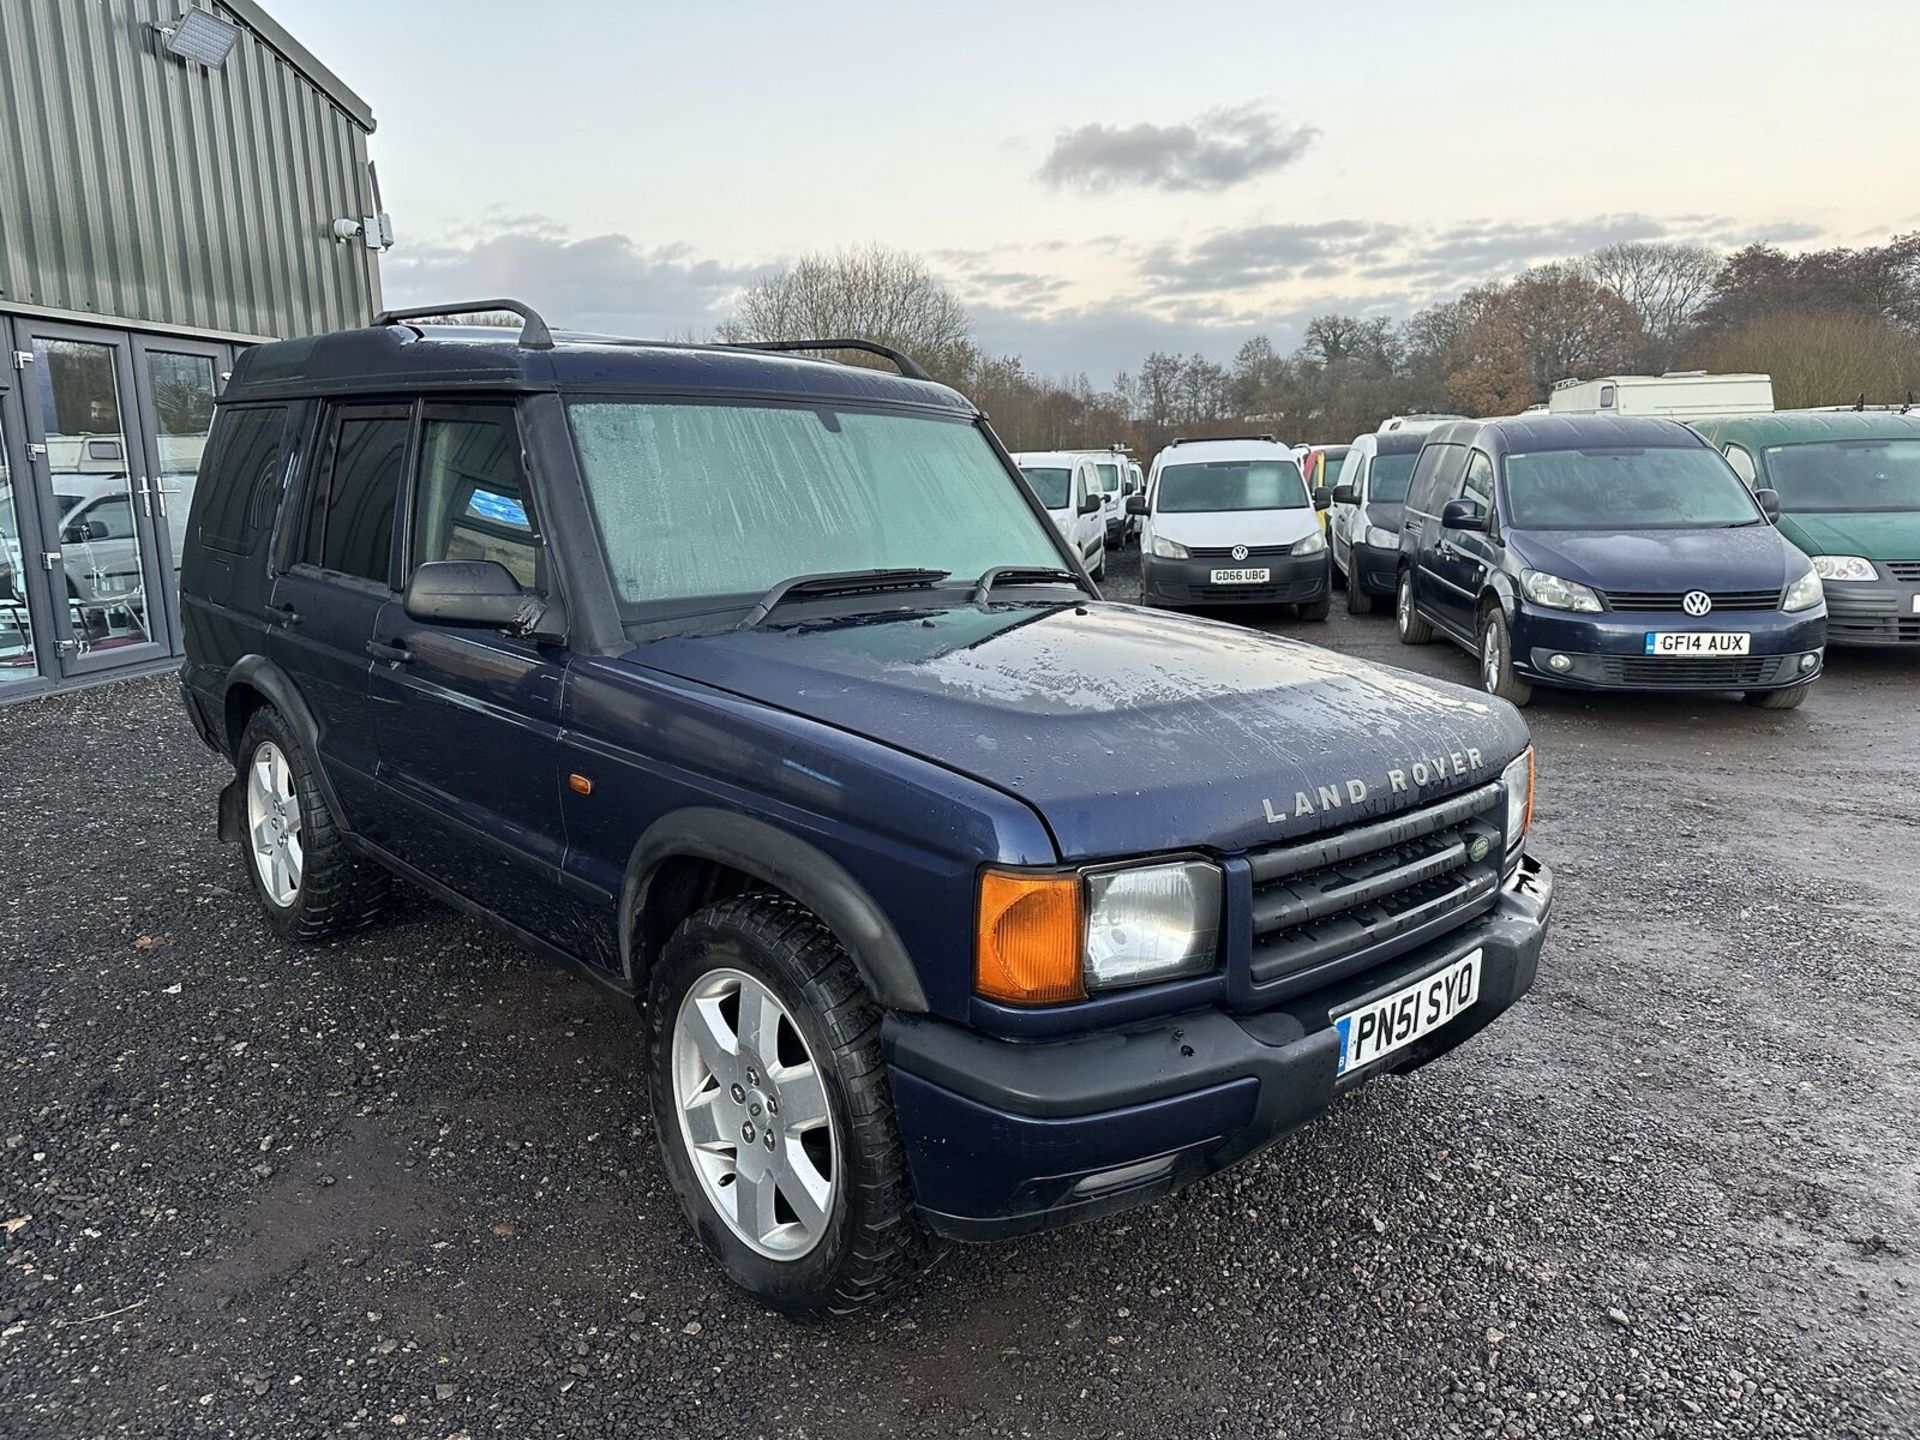 123K MILES - 51 PLATE LAND ROVER DISCOVERY V8I ES AUTO LPG - NO VAT ON HAMMER